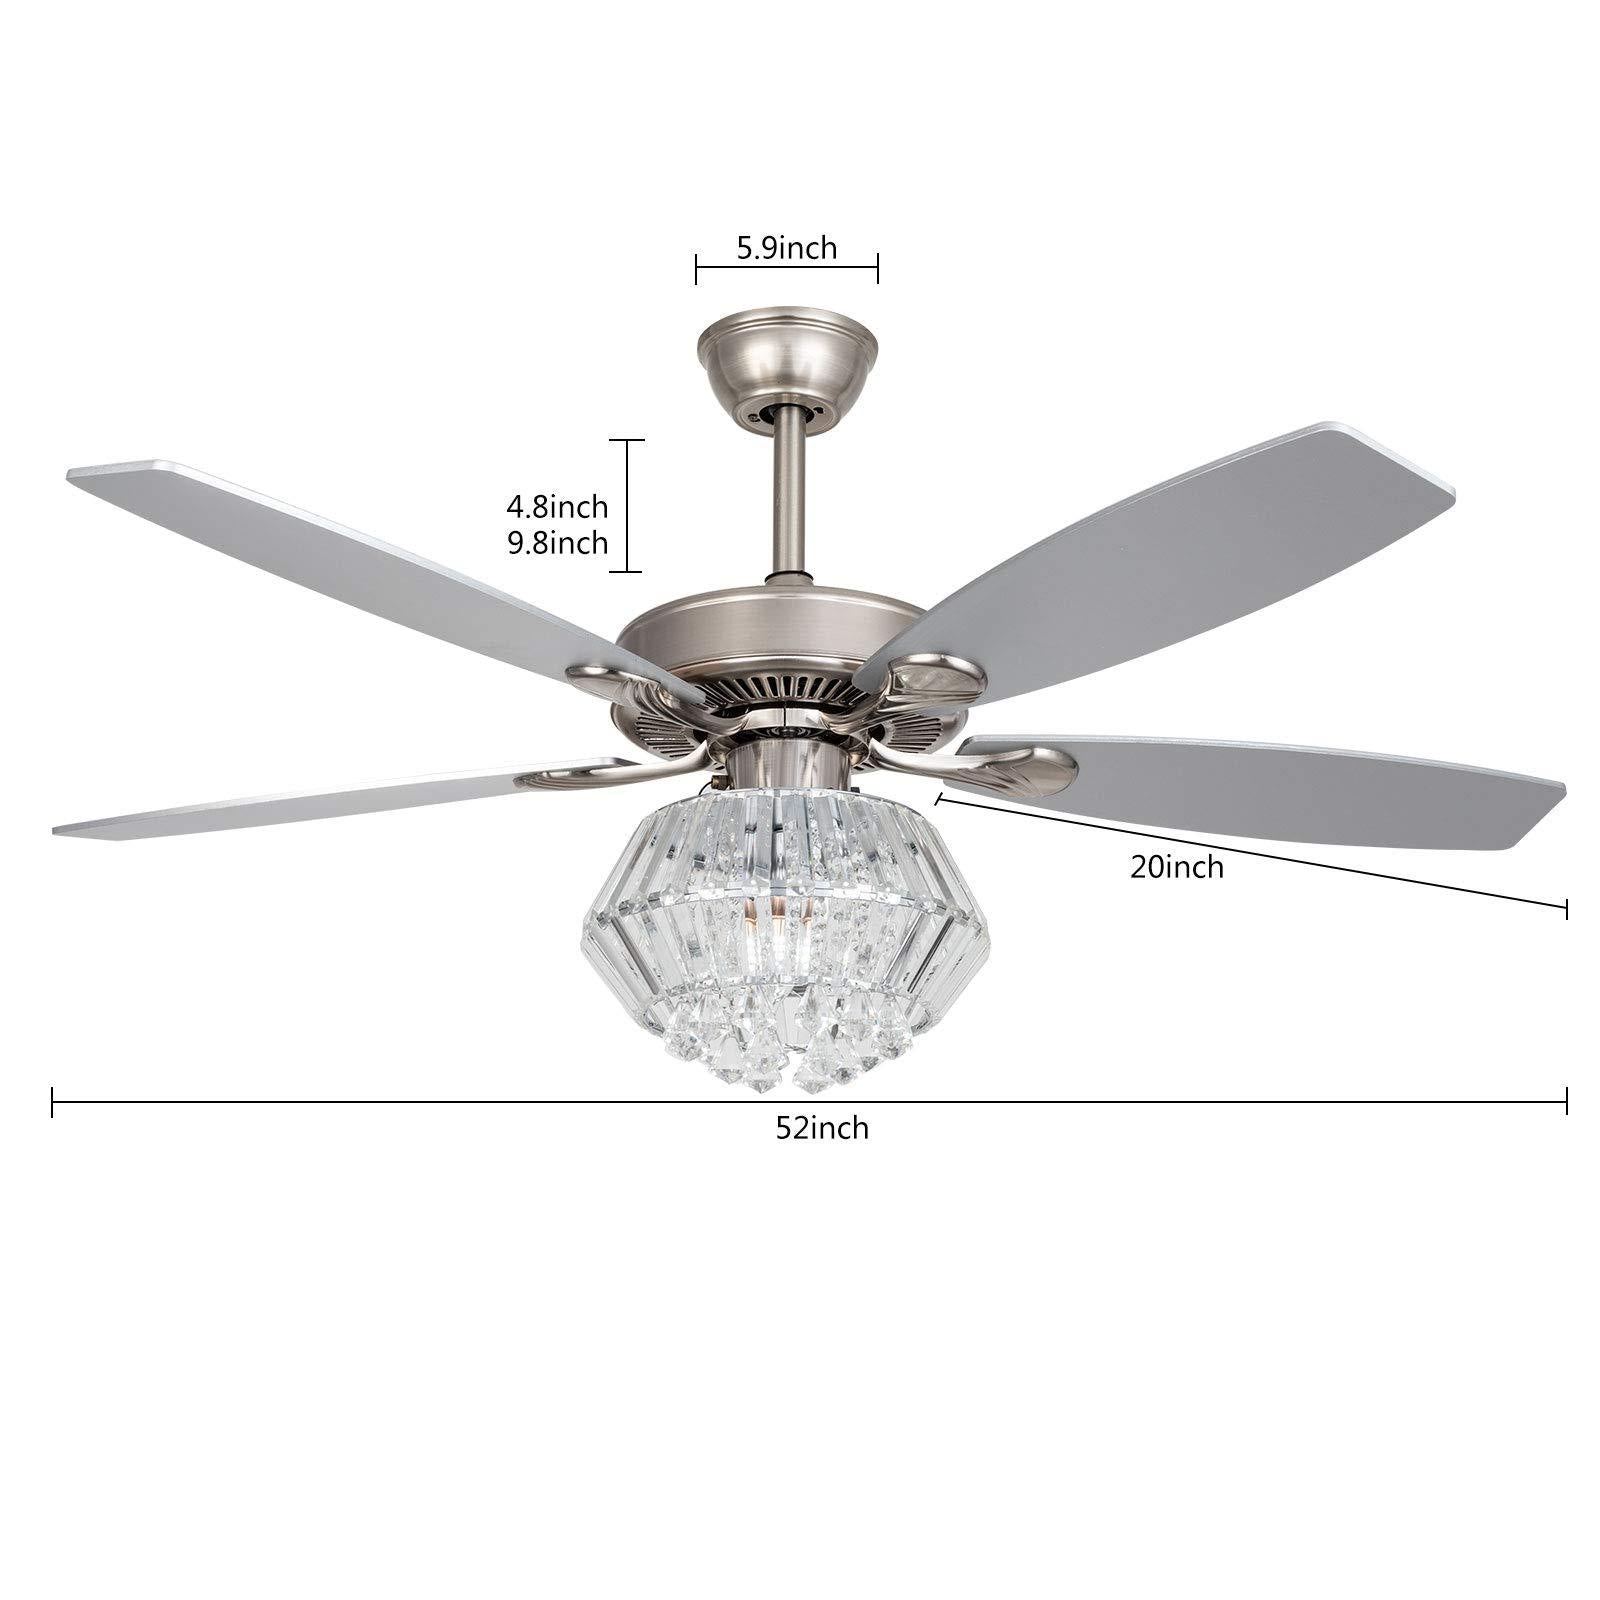 Chandelier crystal ceiling fan light with remote control, 52 inches 5 wood blade specifications